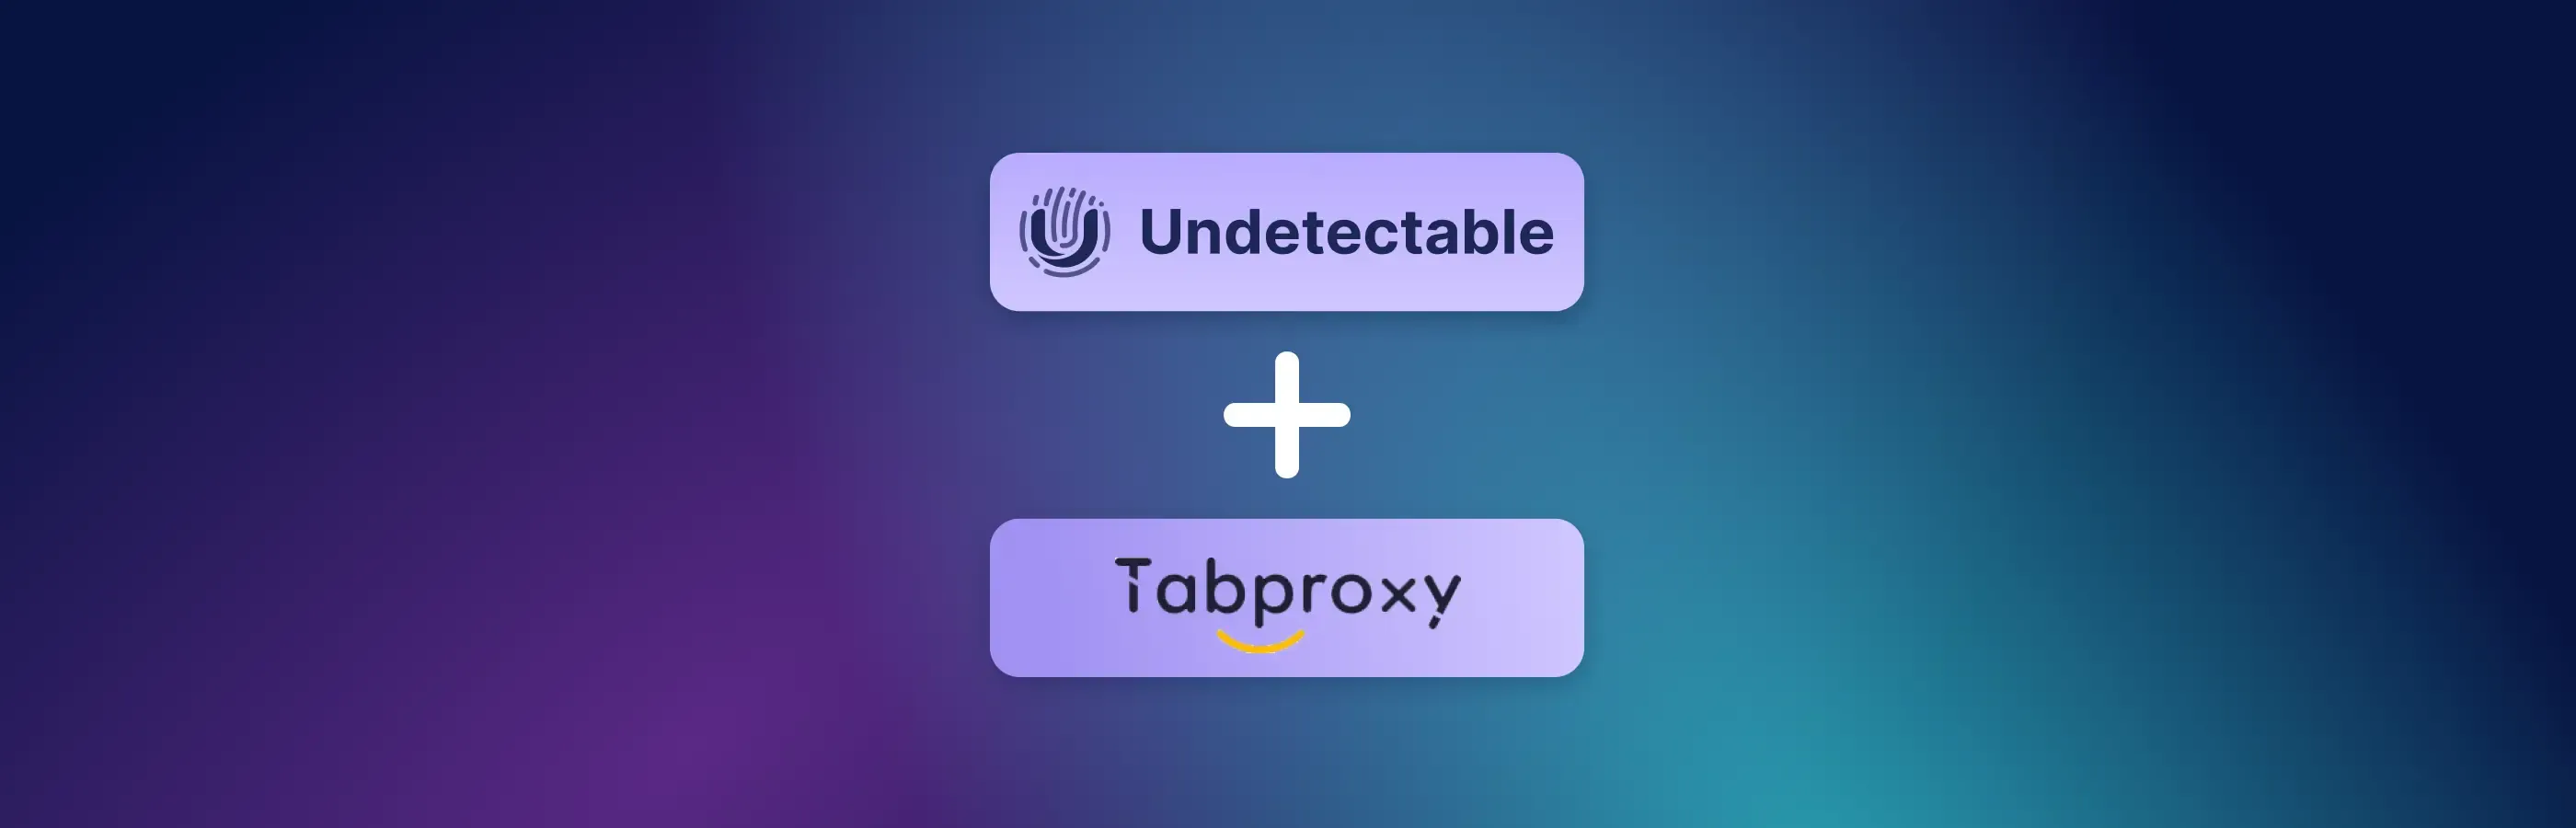  Undetectable on TabProxy